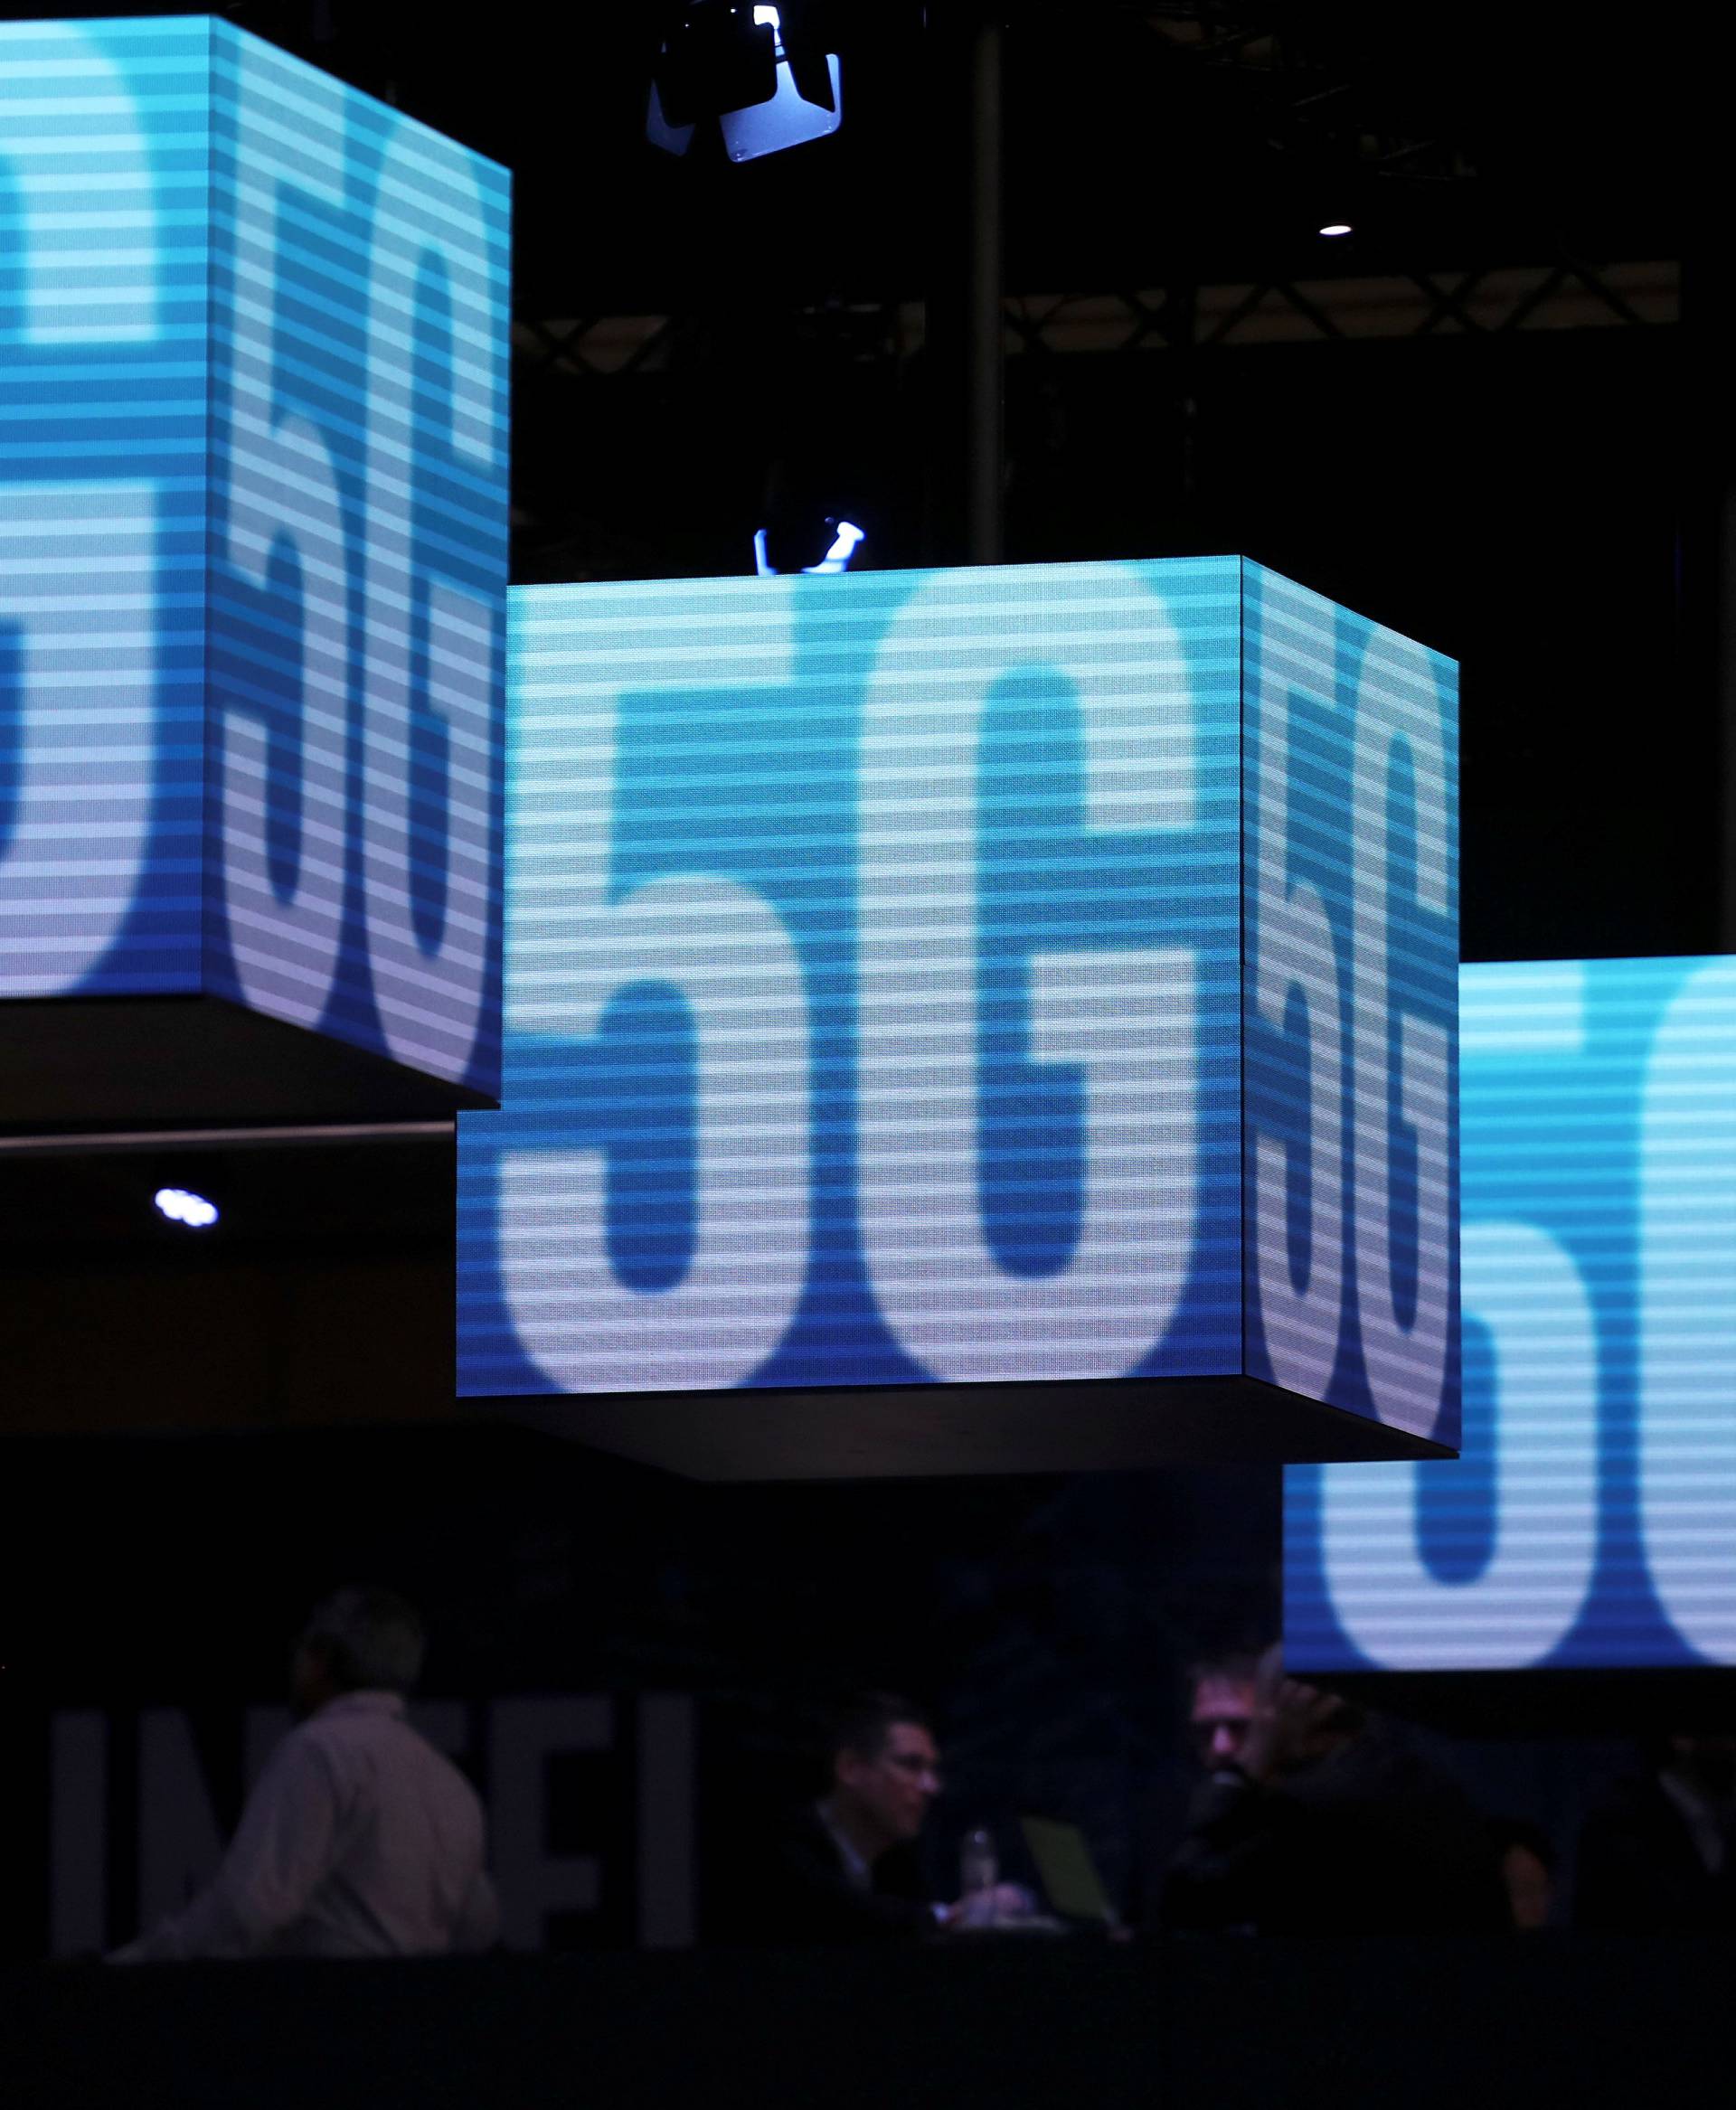 Hanging cubes display 5G logo at the Mobile World Congress in Barcelona